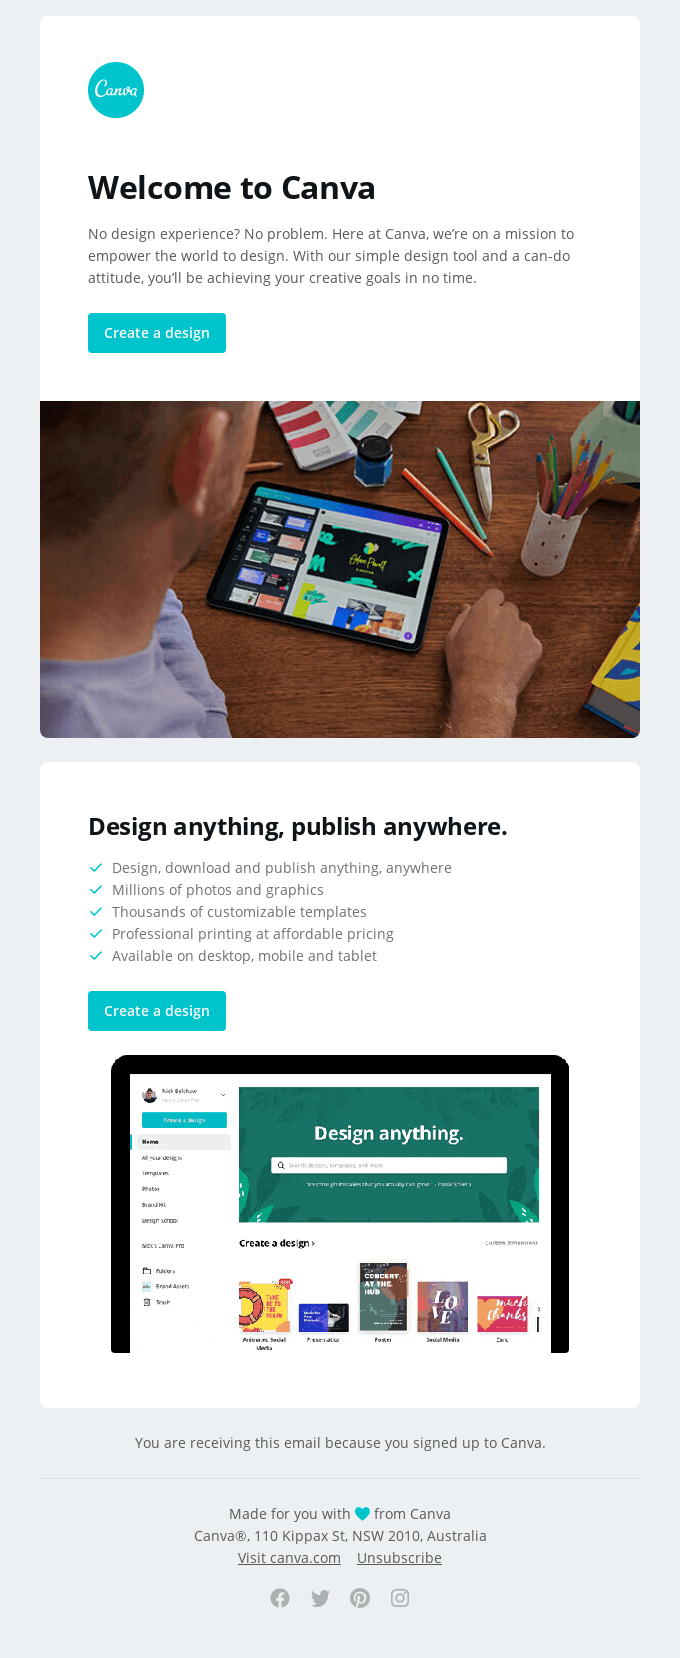 Welcome to Canva - Canva Email Newsletter